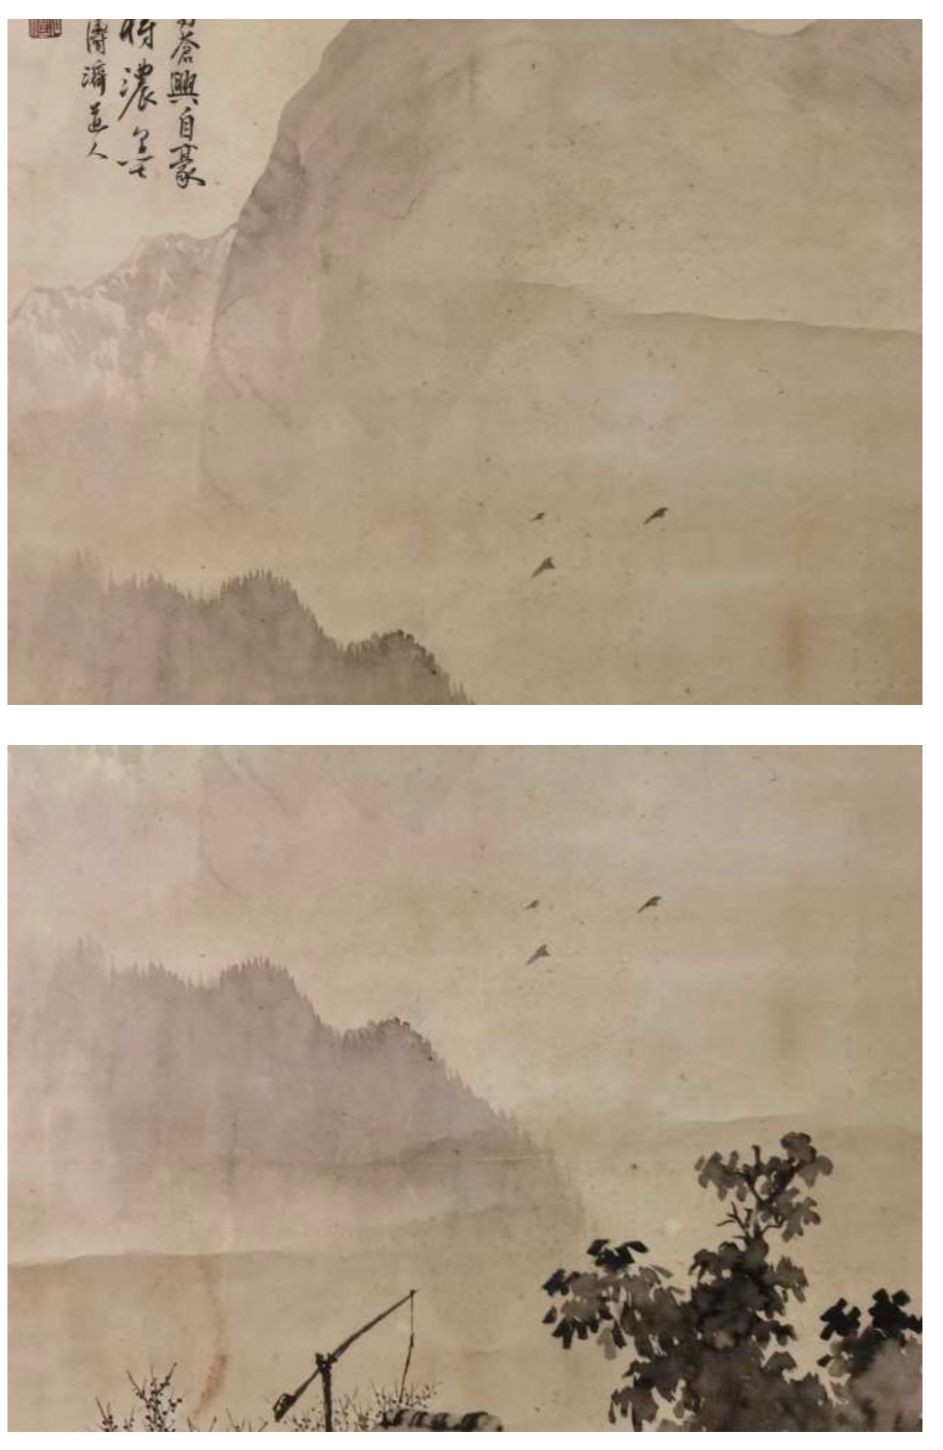 A Landscape Chinese Ink and Watercolour on paper scroll - Attributed to Shi Tao (1642-1707), one - Bild 4 aus 5